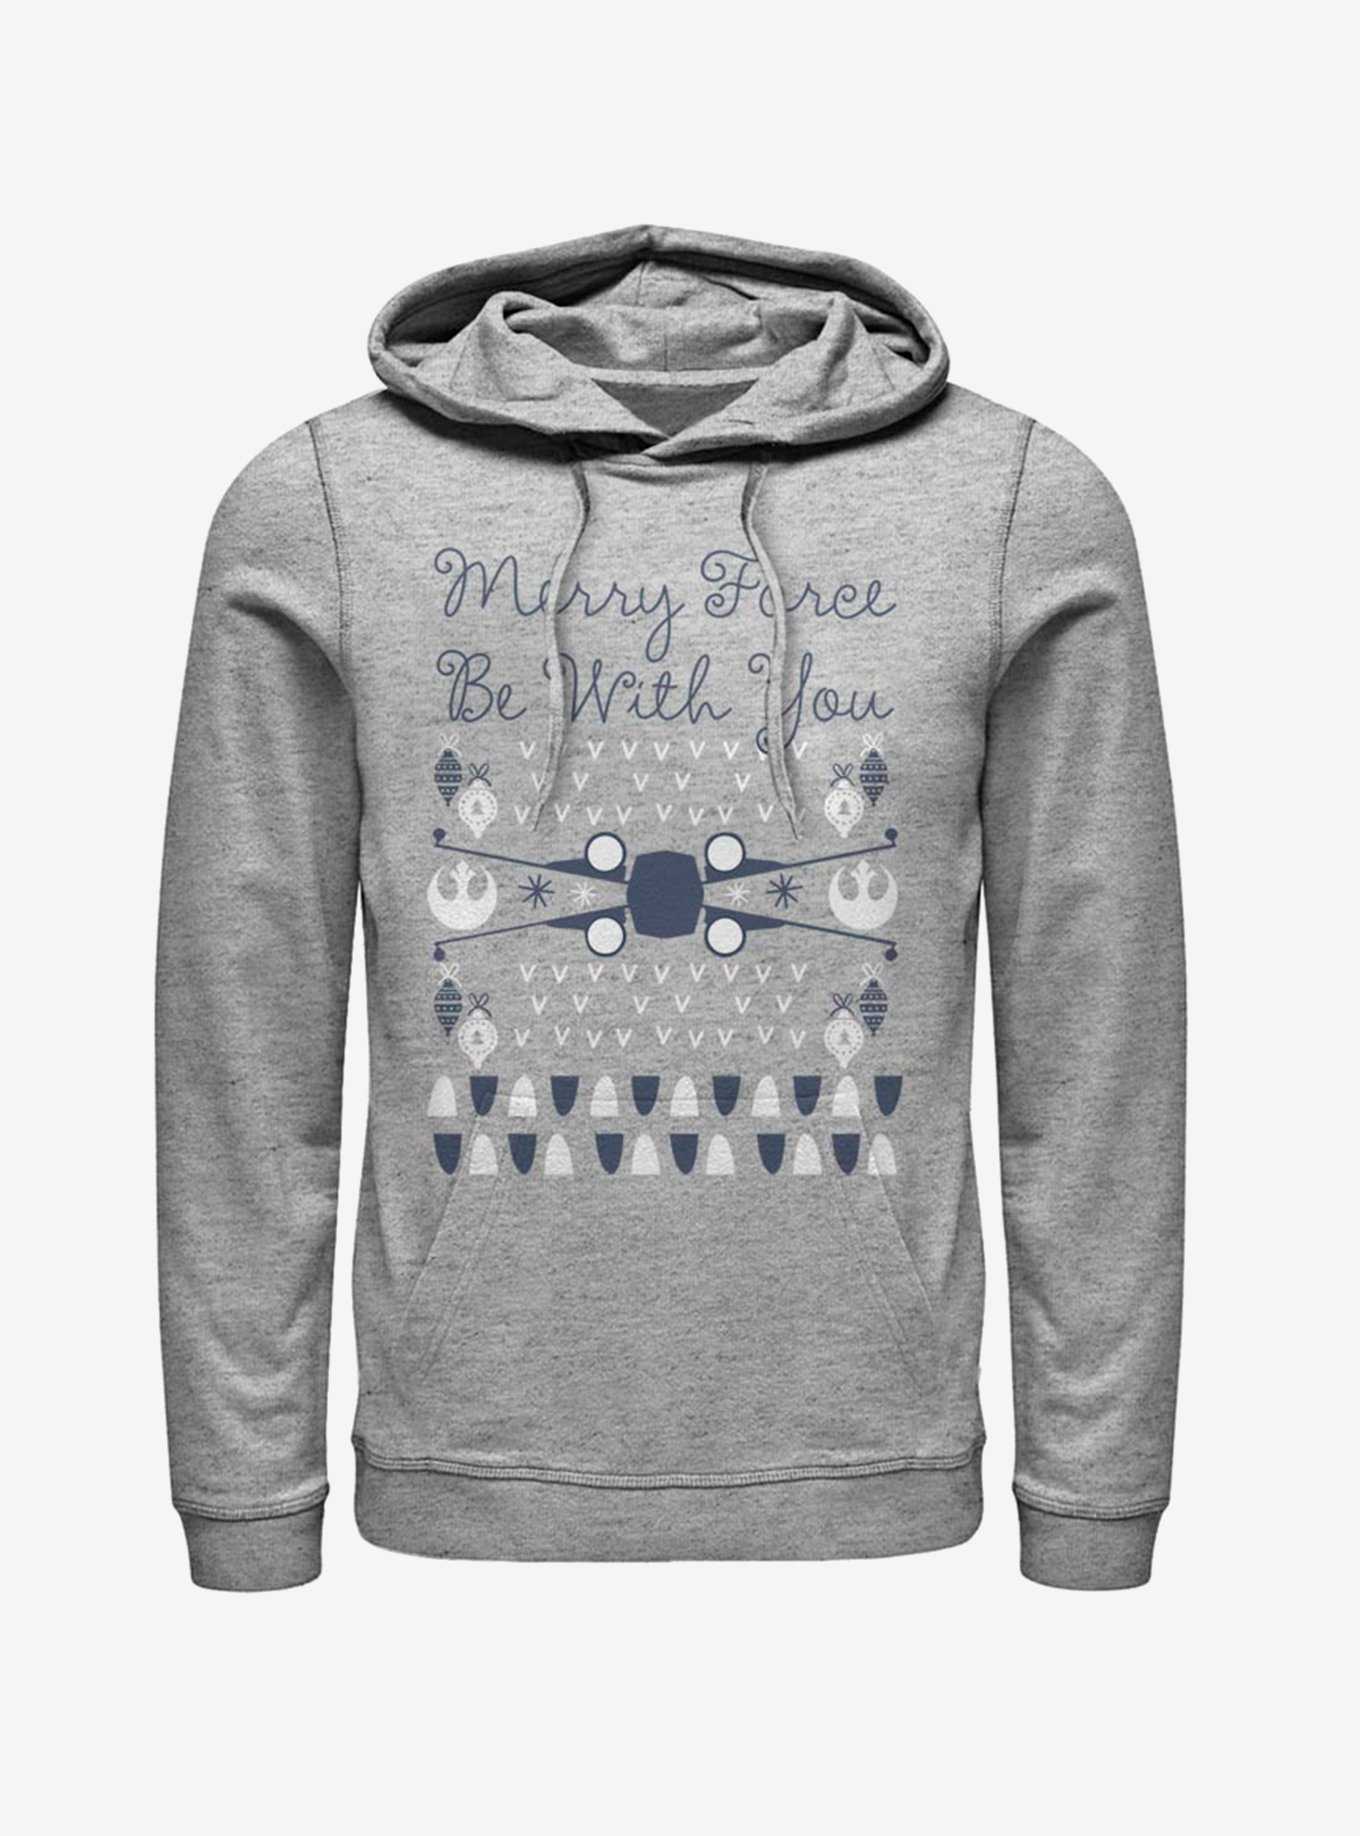 Star Wars X-Wing Merry Force Be With You Ugly Christmas Hoodie, , hi-res